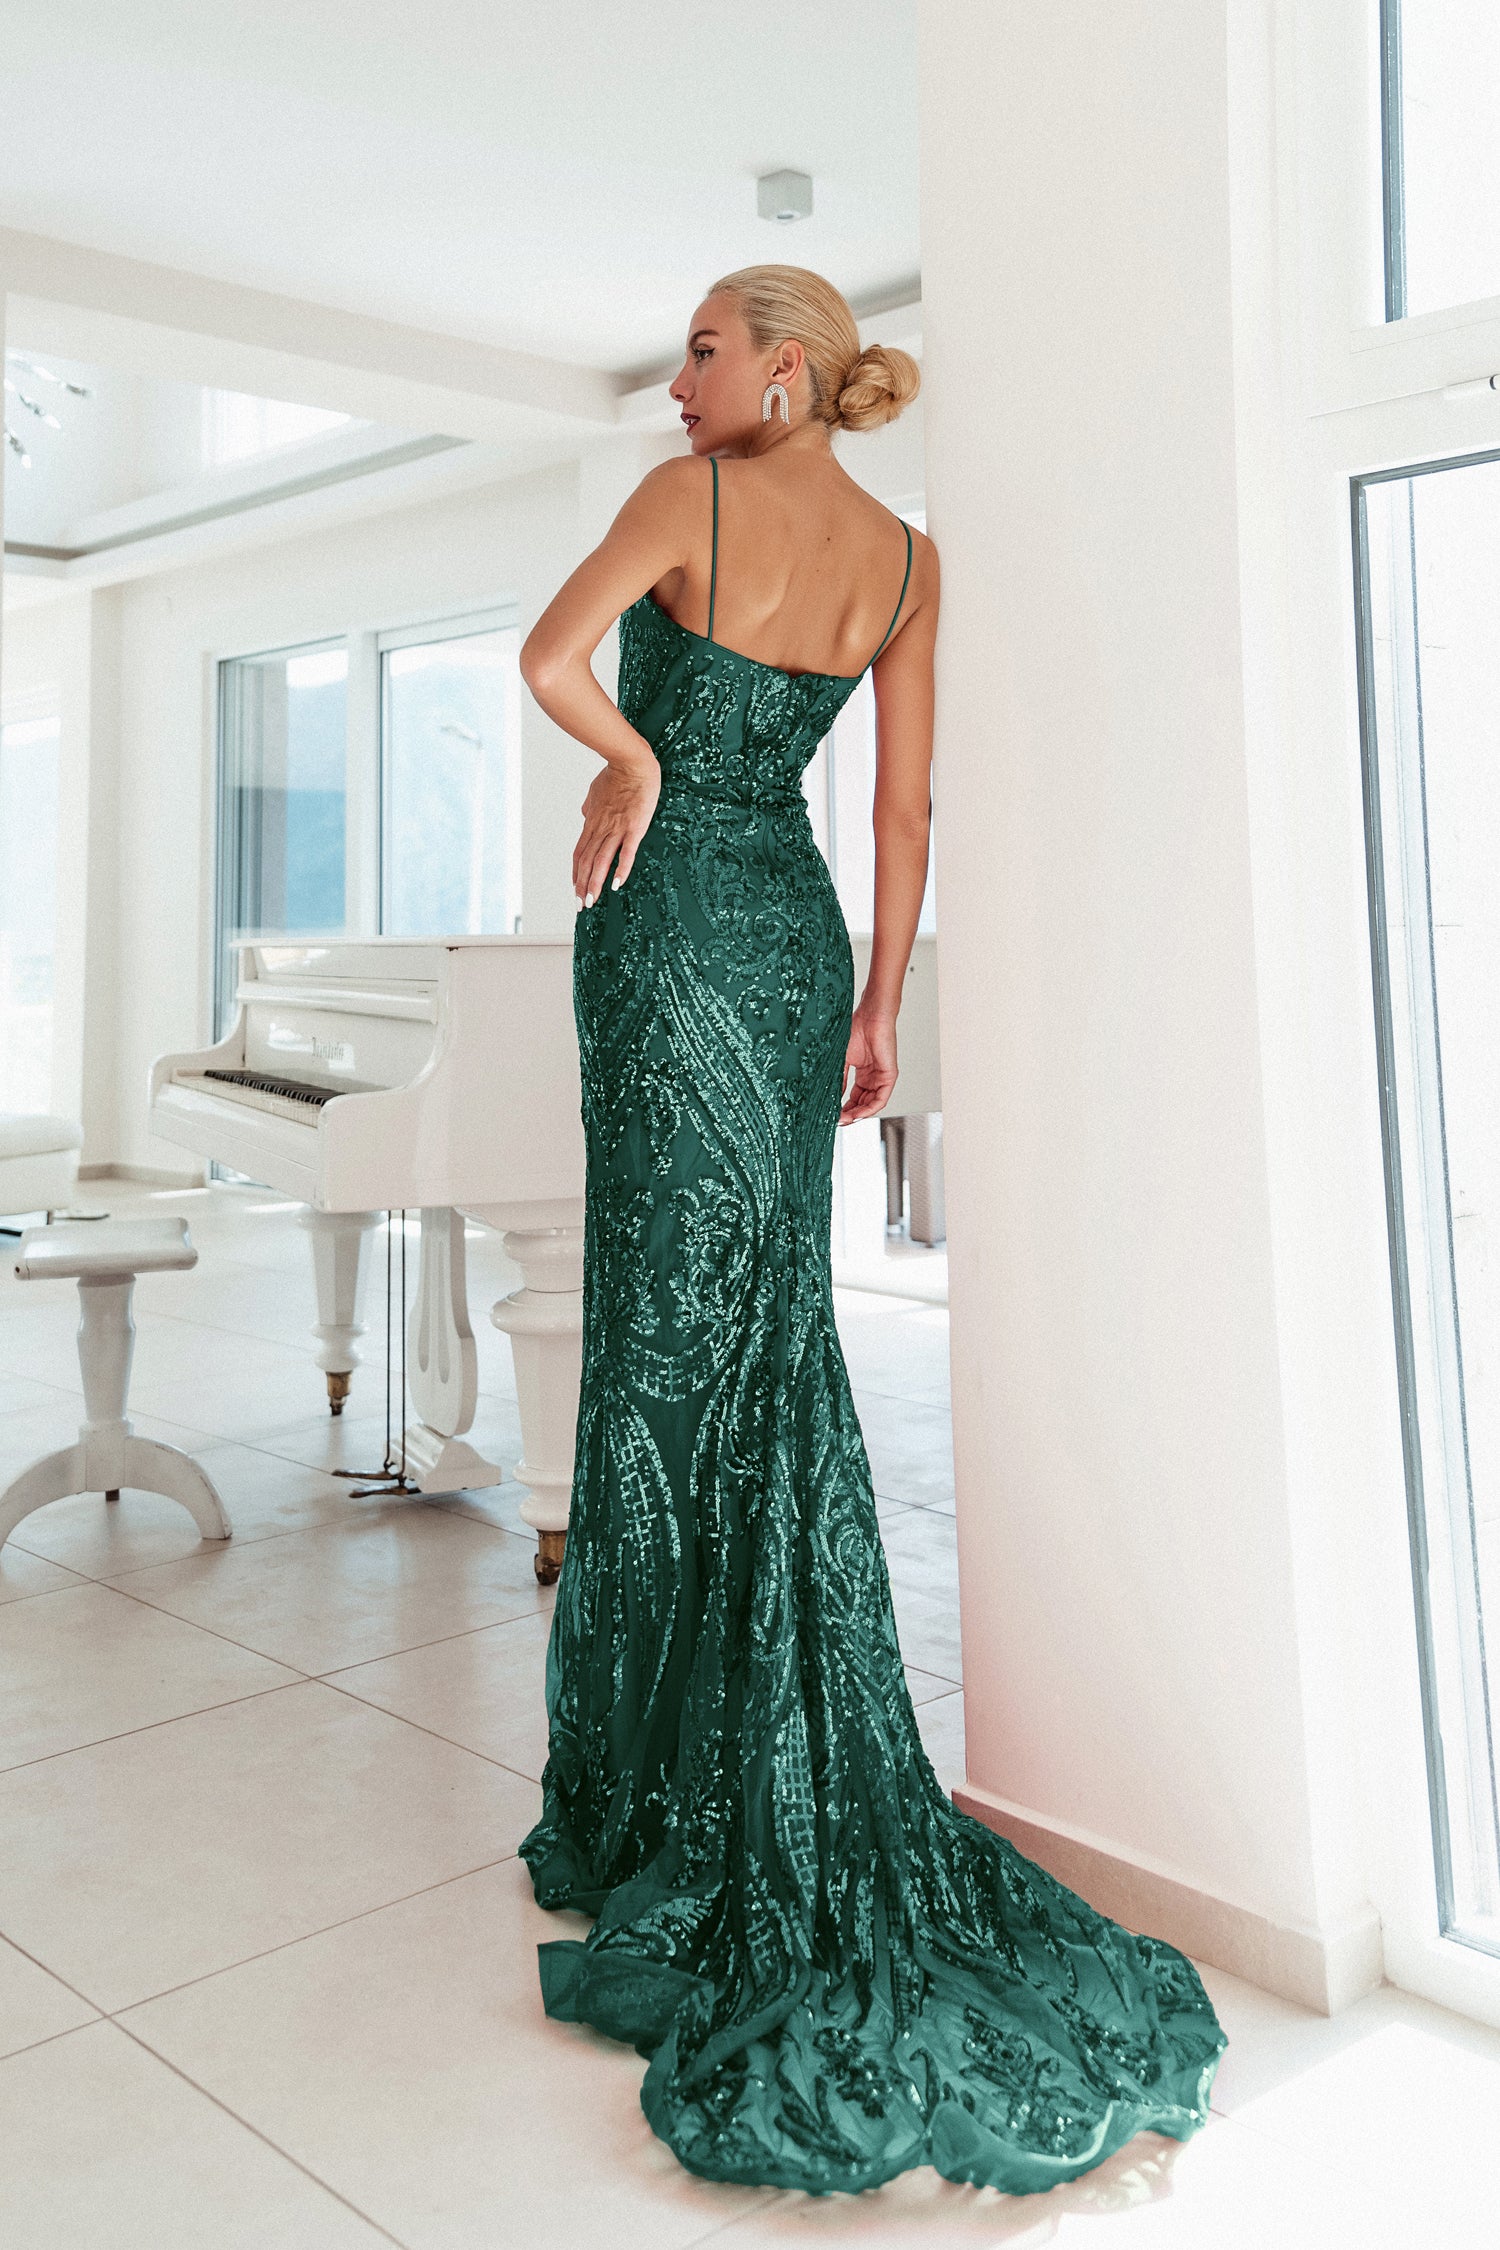 Tina Holly Couture BA999 Emerald Green Sequin & Lace Mermaid Formal Dress